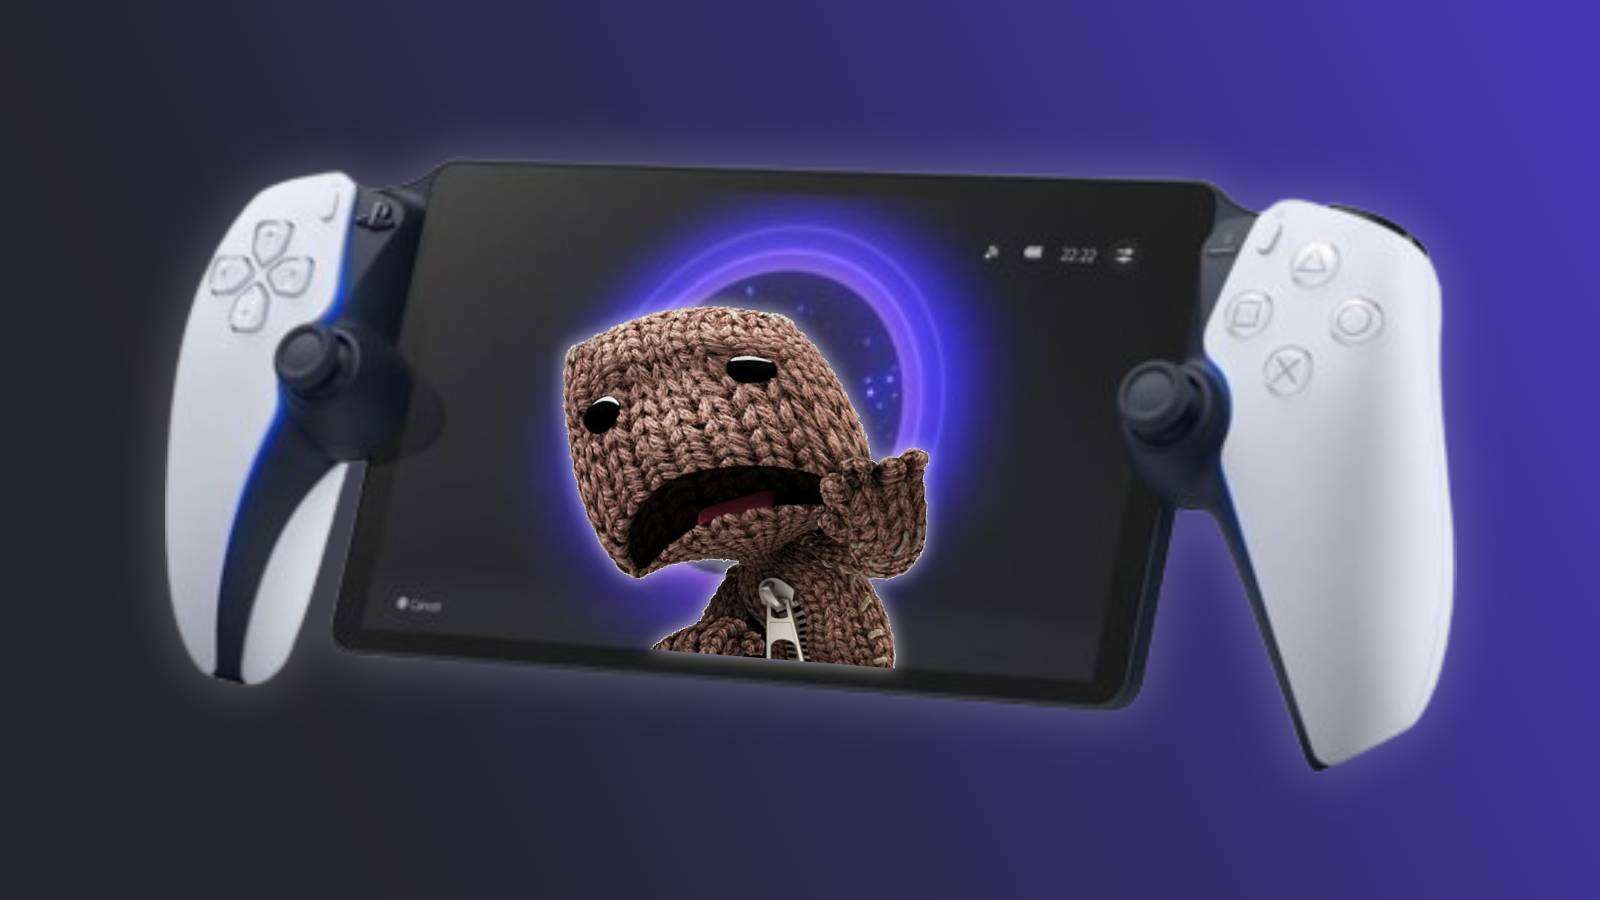 An image of the PlayStation Portal remote play device, on a black and blue background with the Sackboy game character on the screen looking sad.